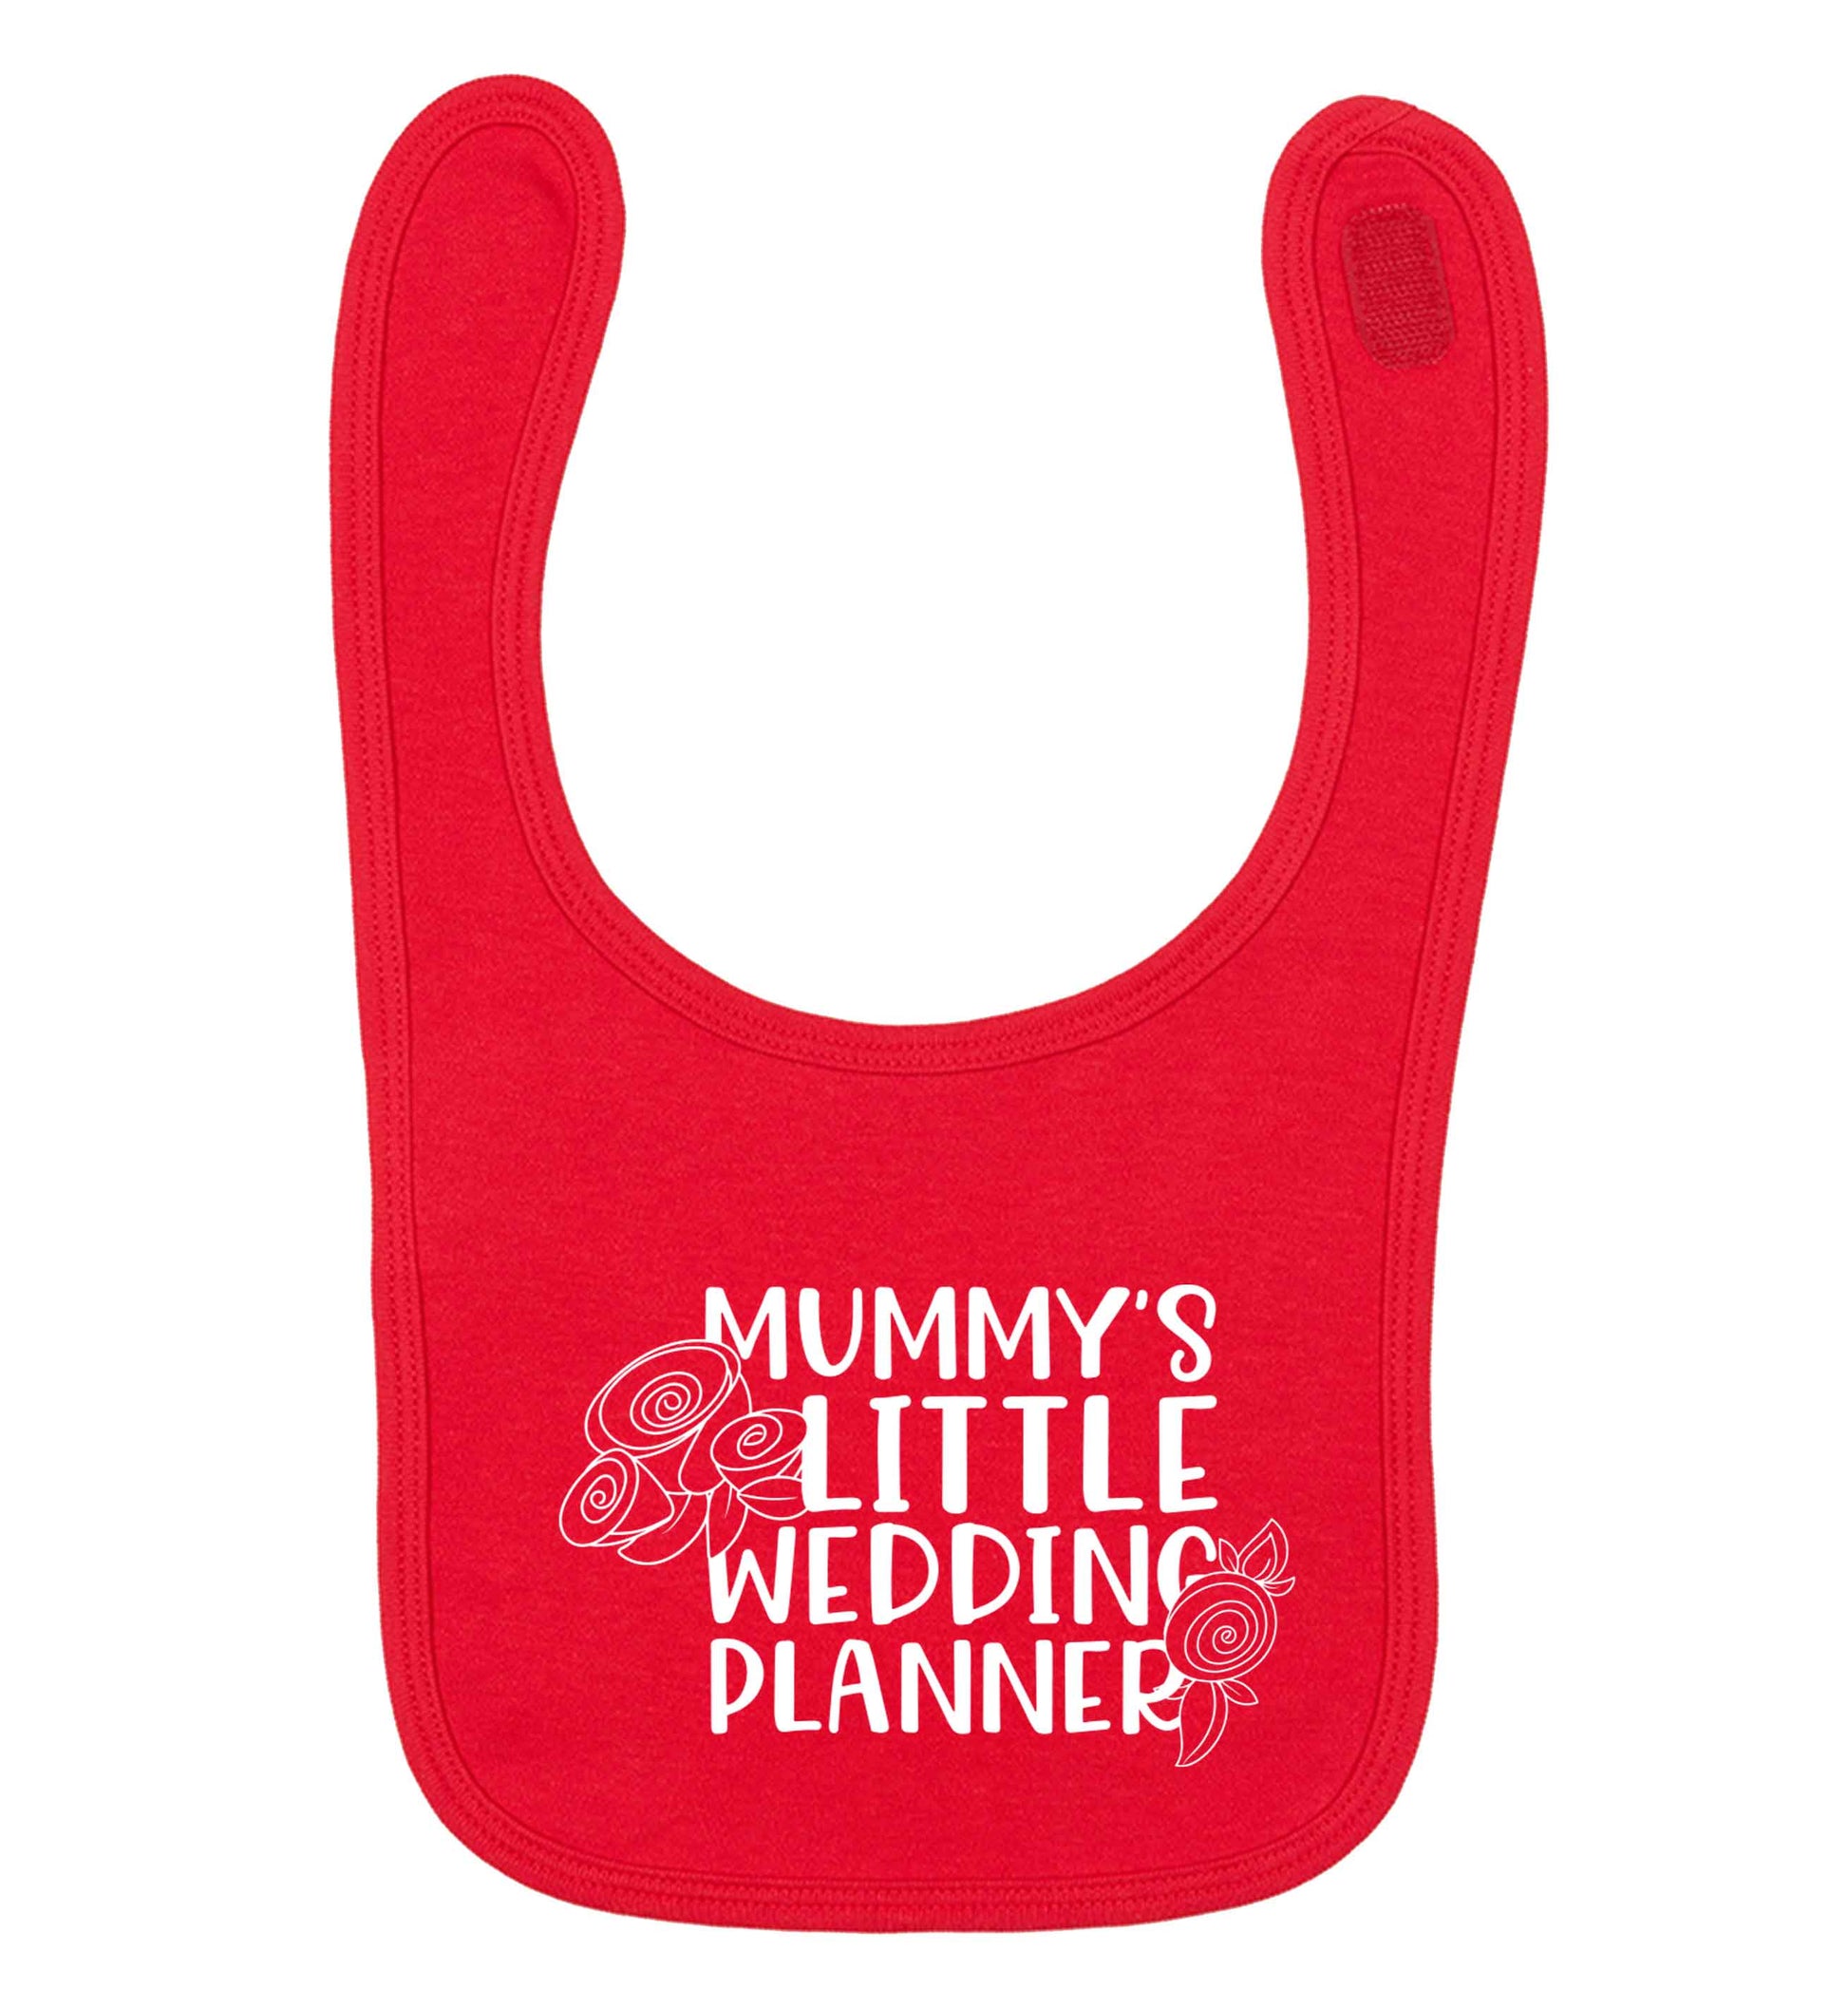 adorable wedding themed gifts for your mini wedding planner! red baby bib